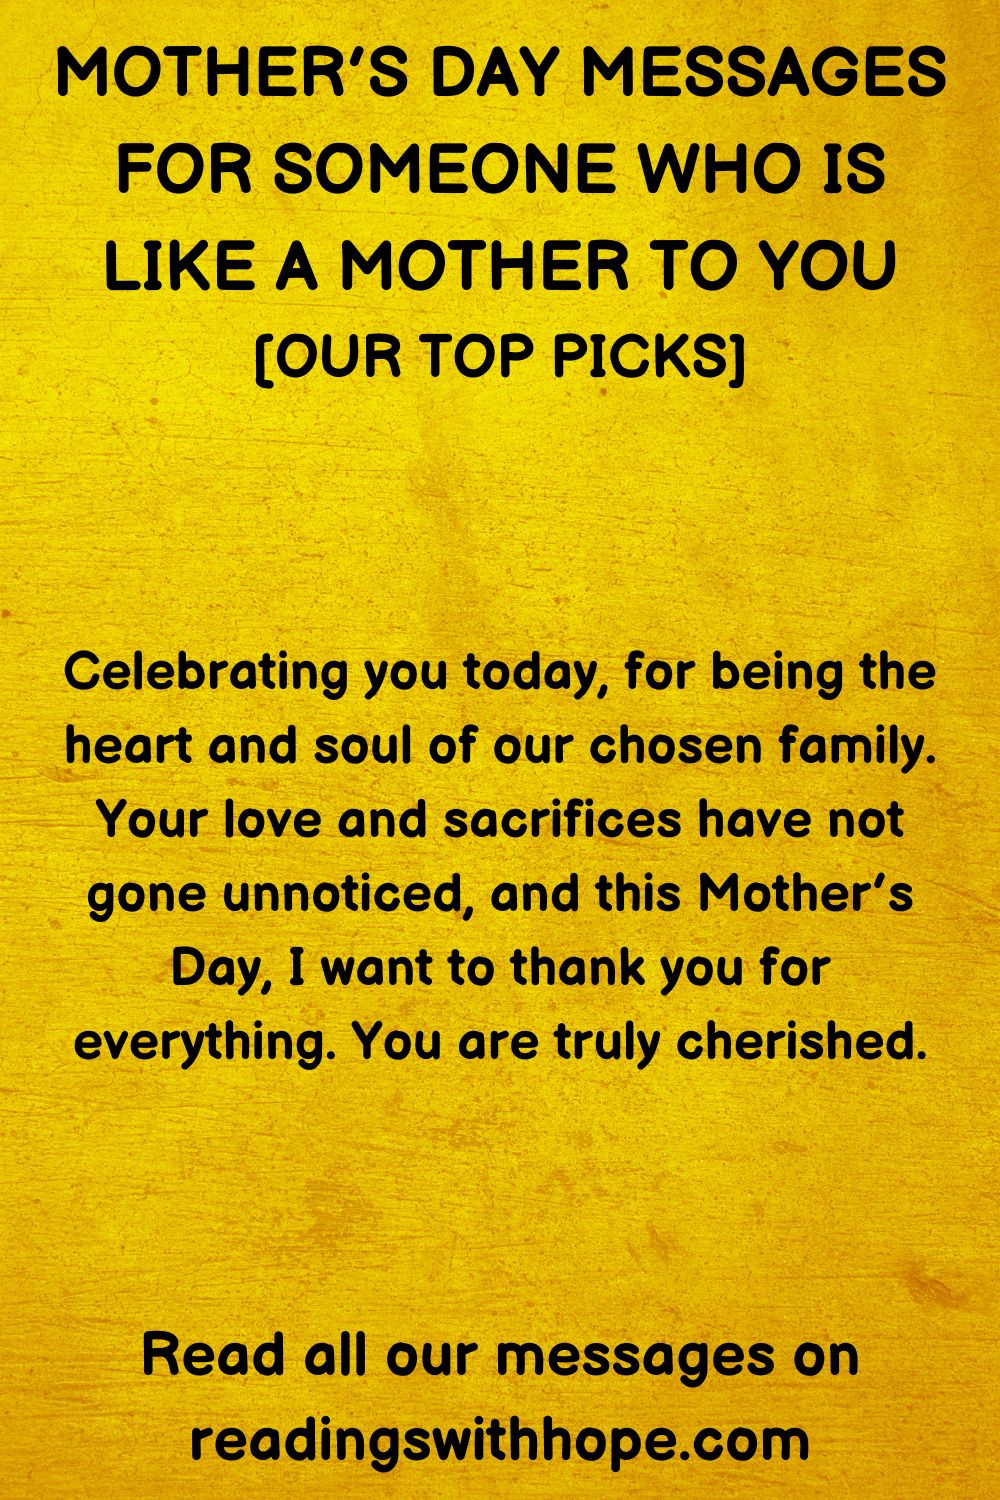 48 Mother’s Day Messages for Someone Who is Like a Mother